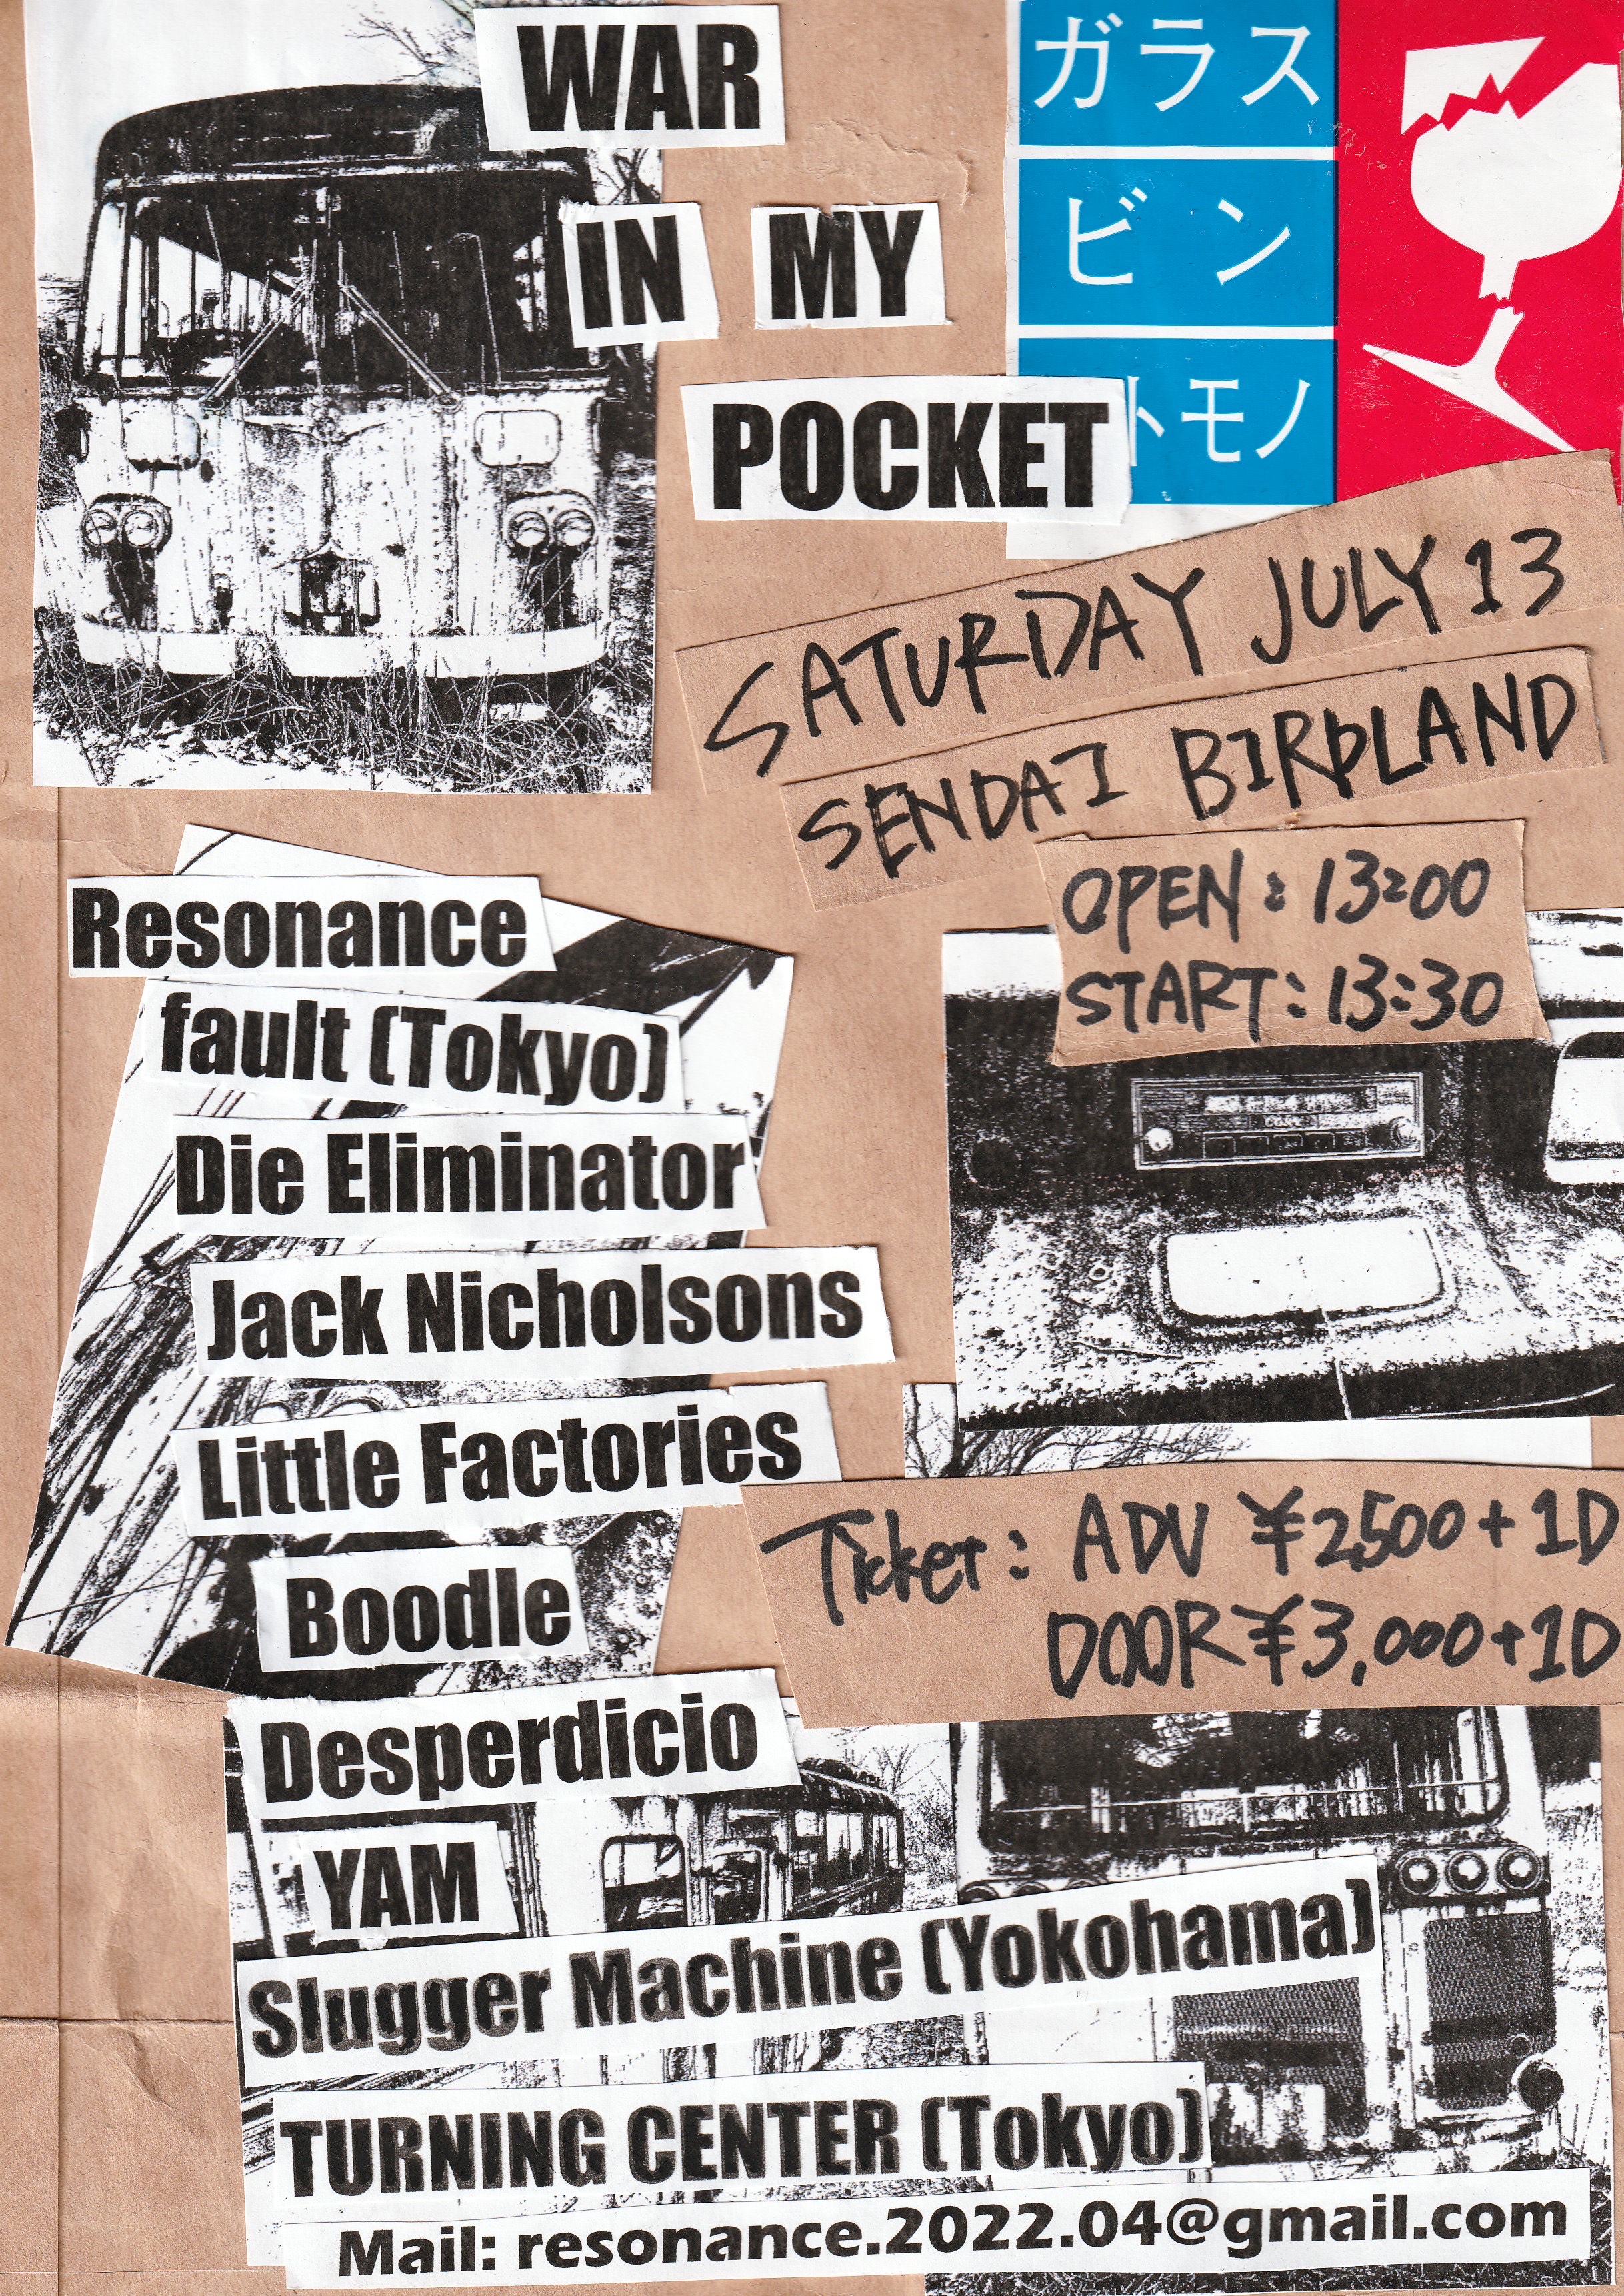 Resonance War in my pocket.EP Release Party vol.1